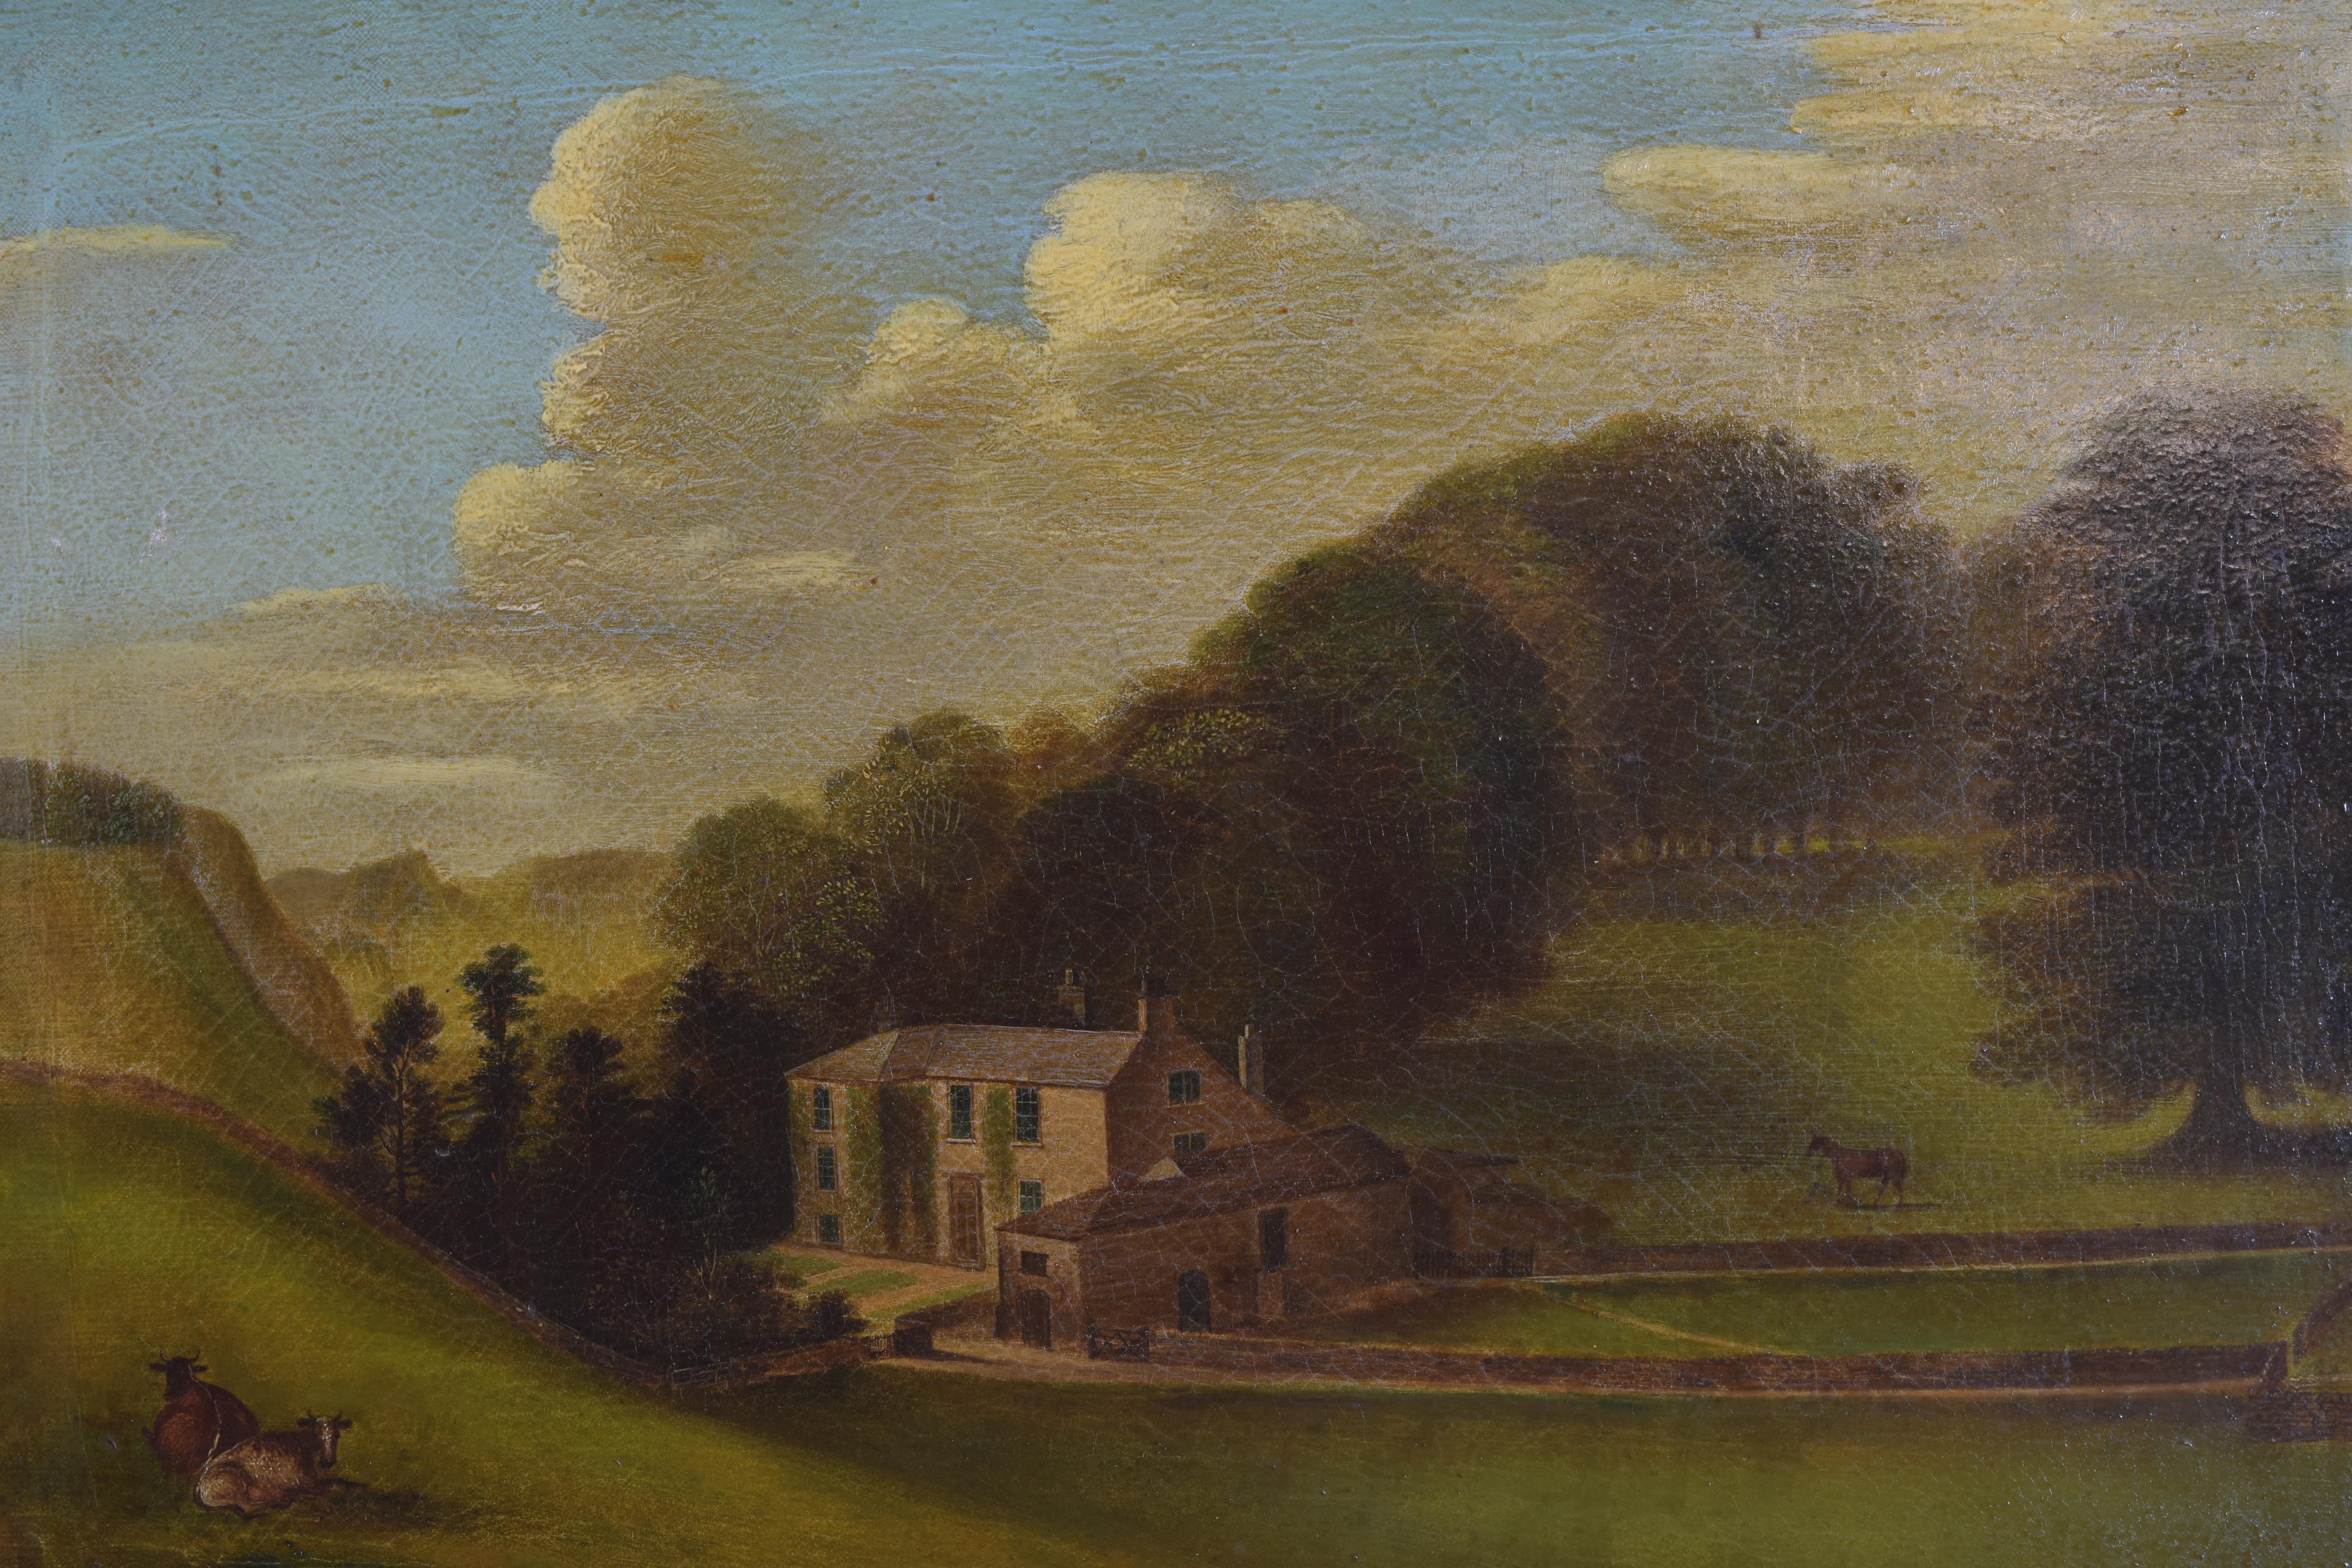 Paint English Oil on Canvas, Bucolic Scene of Country House, signed H.L. Pratt, 1854